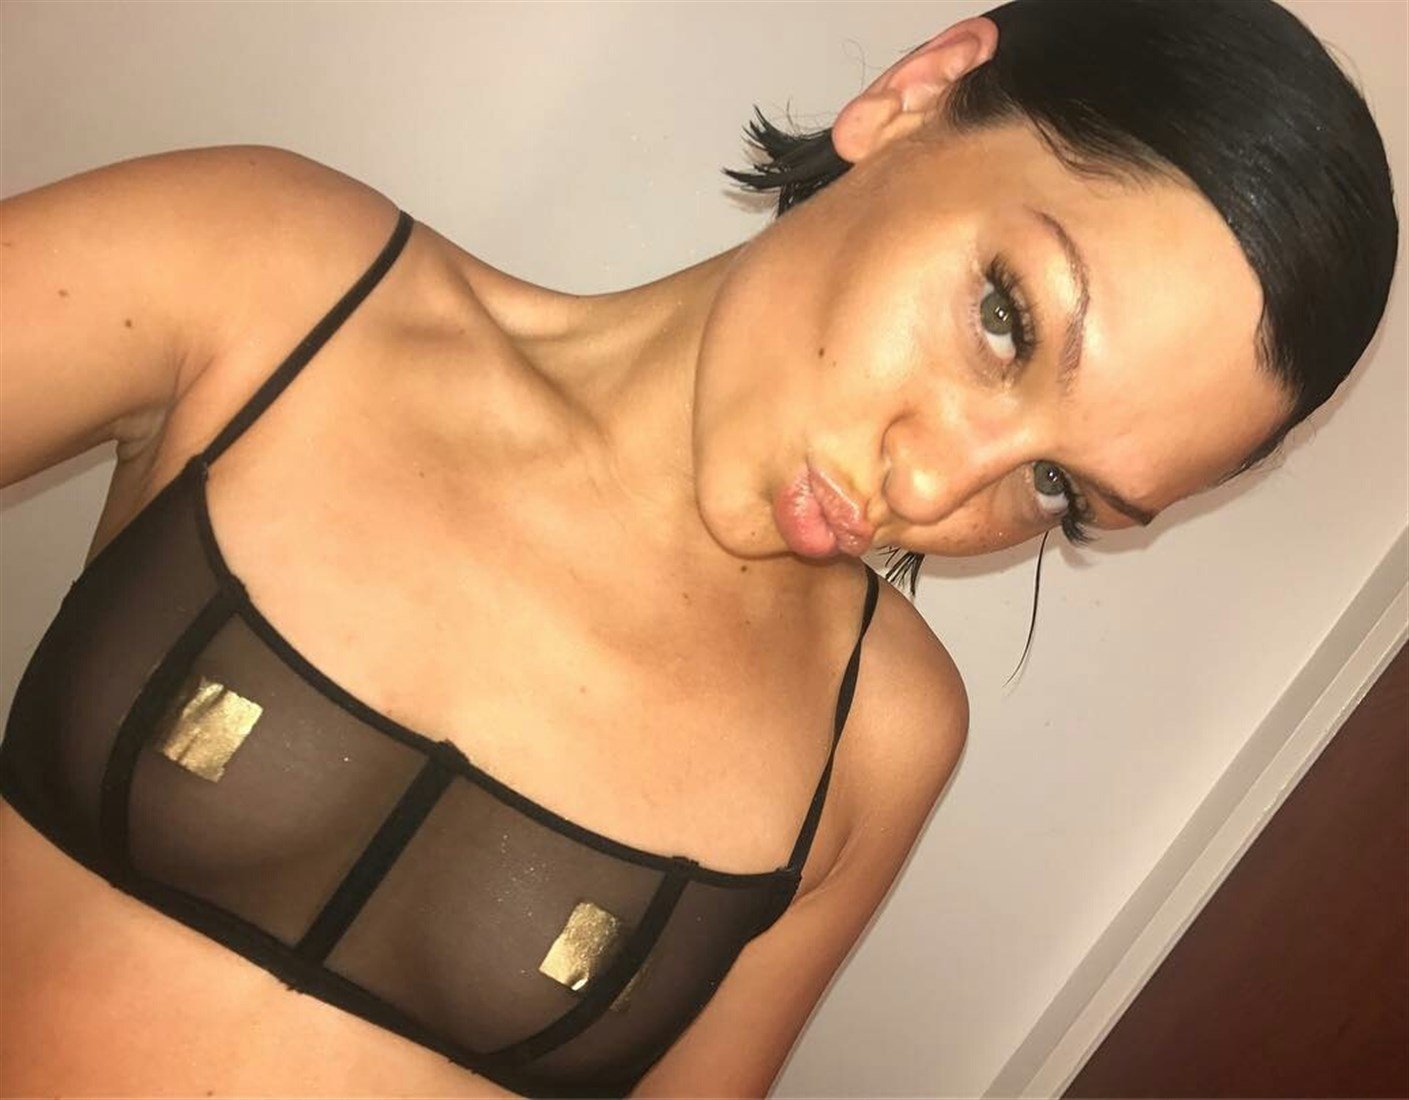 Jessie J Posts And Then Deletes A Topless Photo.